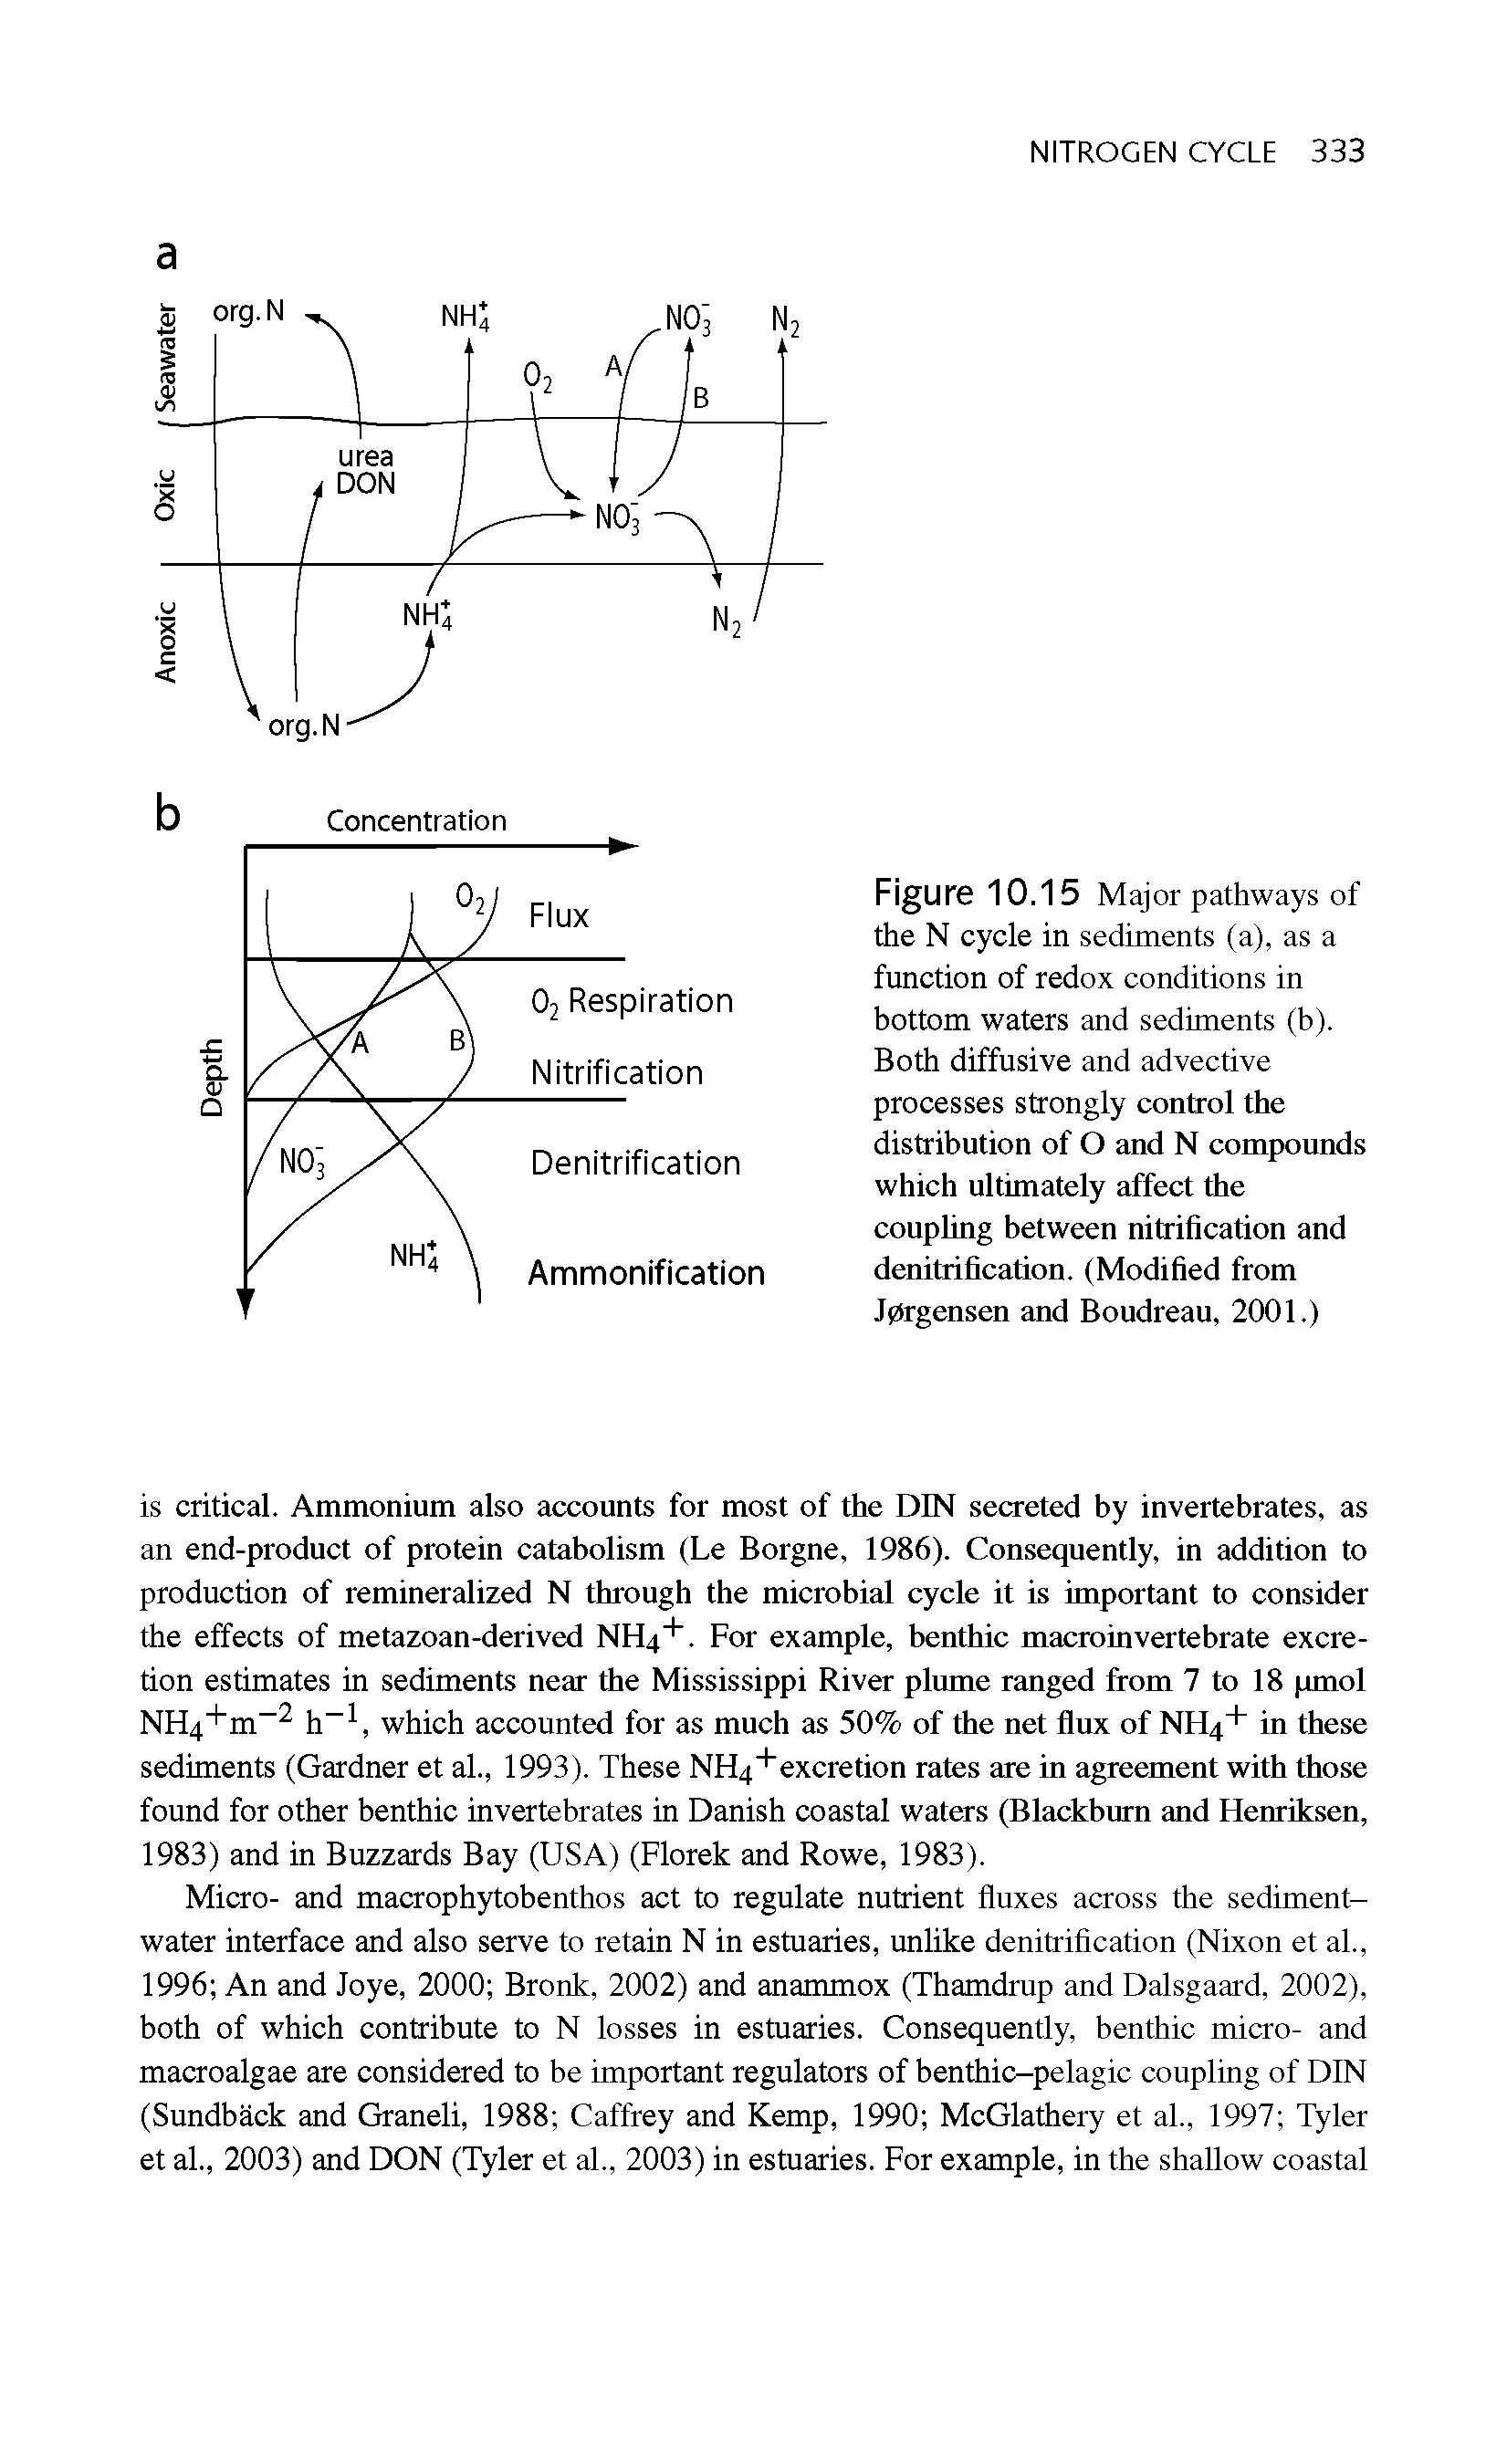 Figure 10.15 Major pathways of the N cycle in sediments (a), as a function of redox conditions in bottom waters and sediments (b). Both diffusive and advective processes strongly control the distribution of O and N compounds which ultimately affect the coupling between nitrification and denitrification. (Modified from Jprgensen and Boudreau, 2001.)...